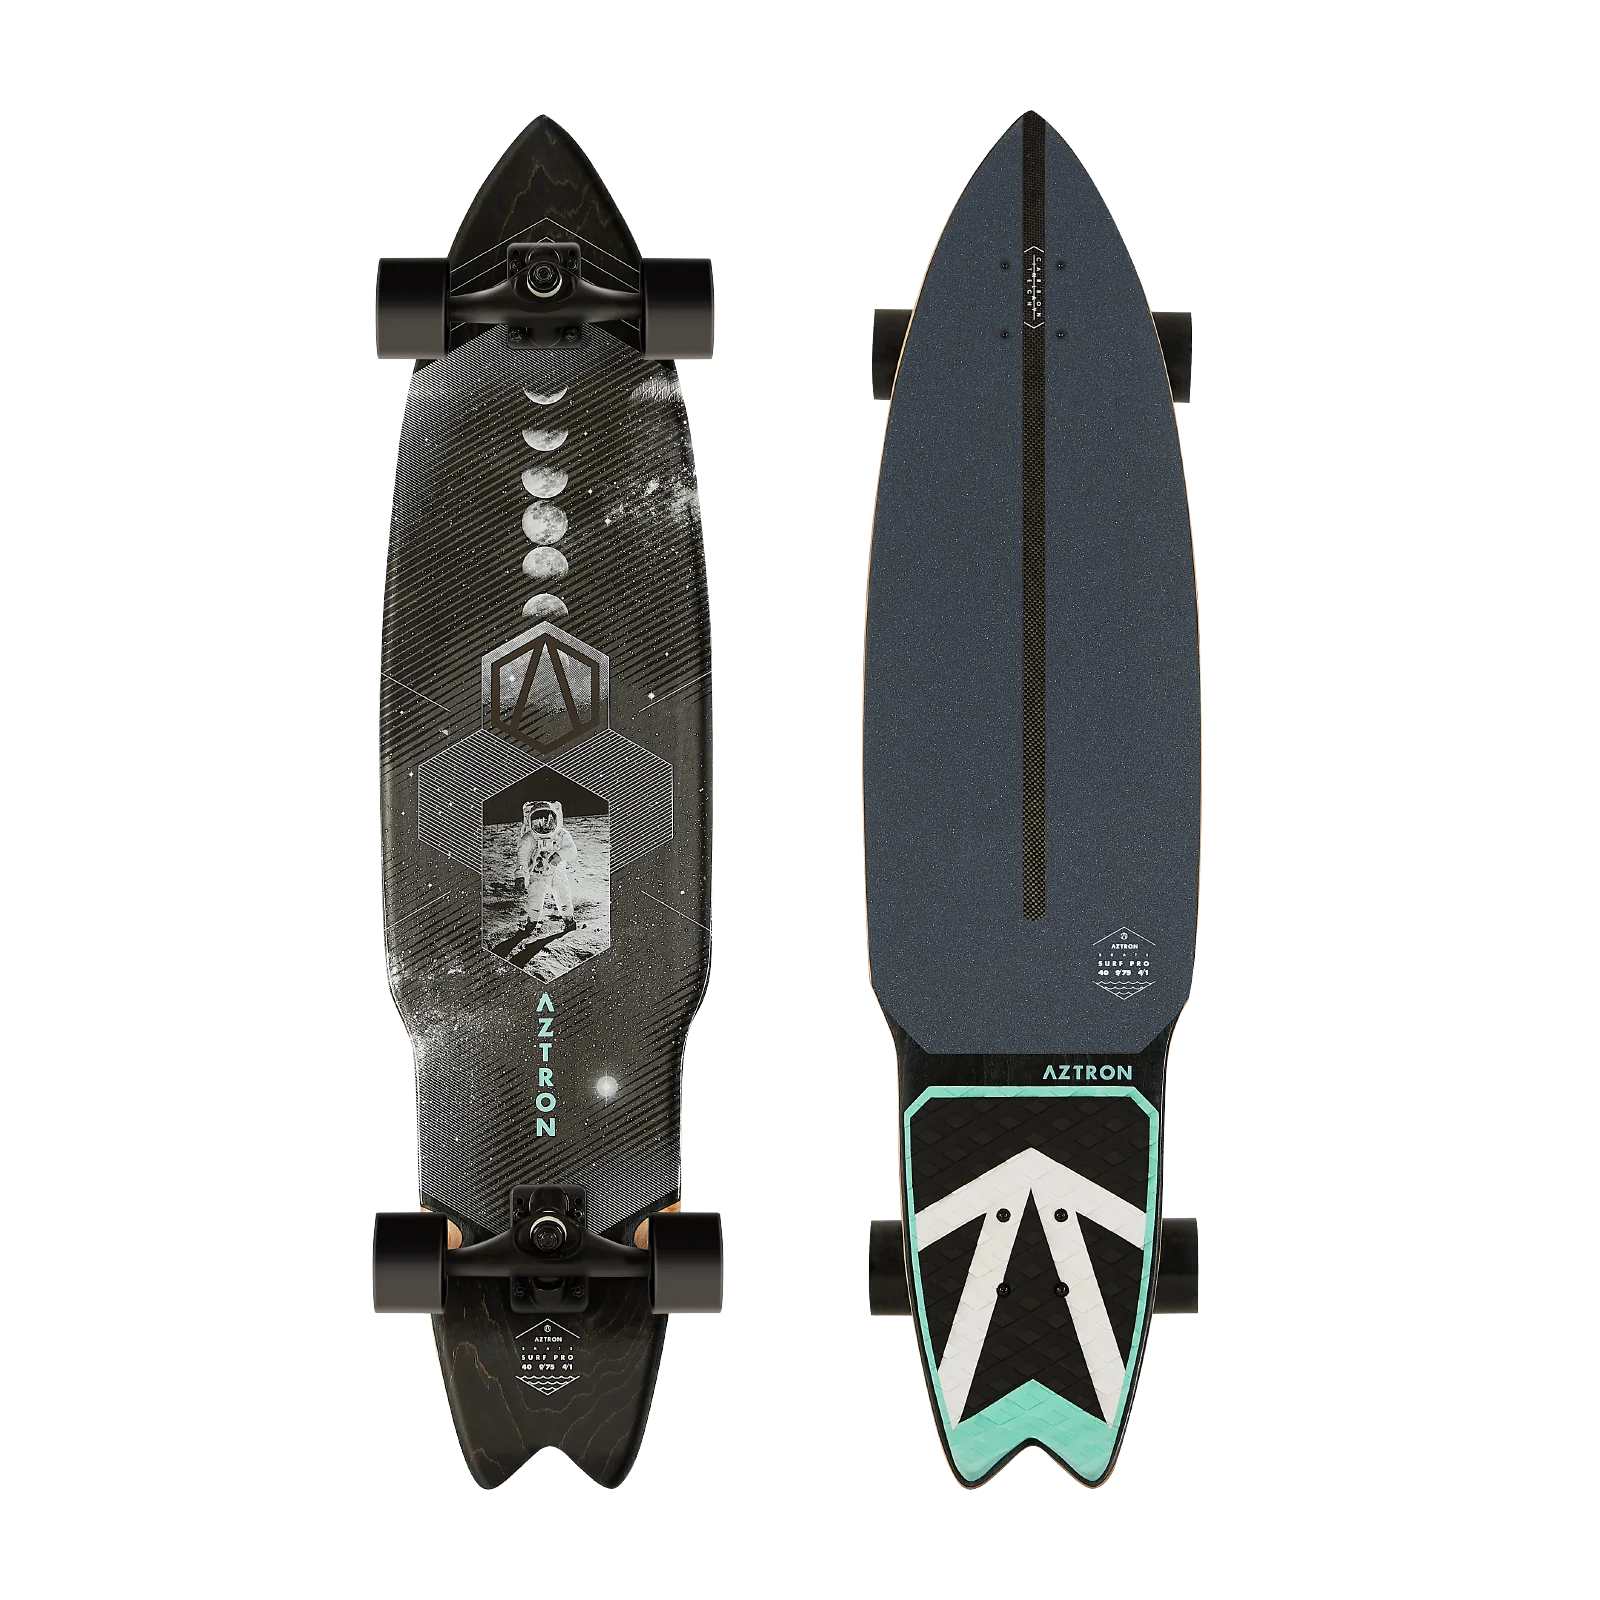 Aztron Space 40" surfskate